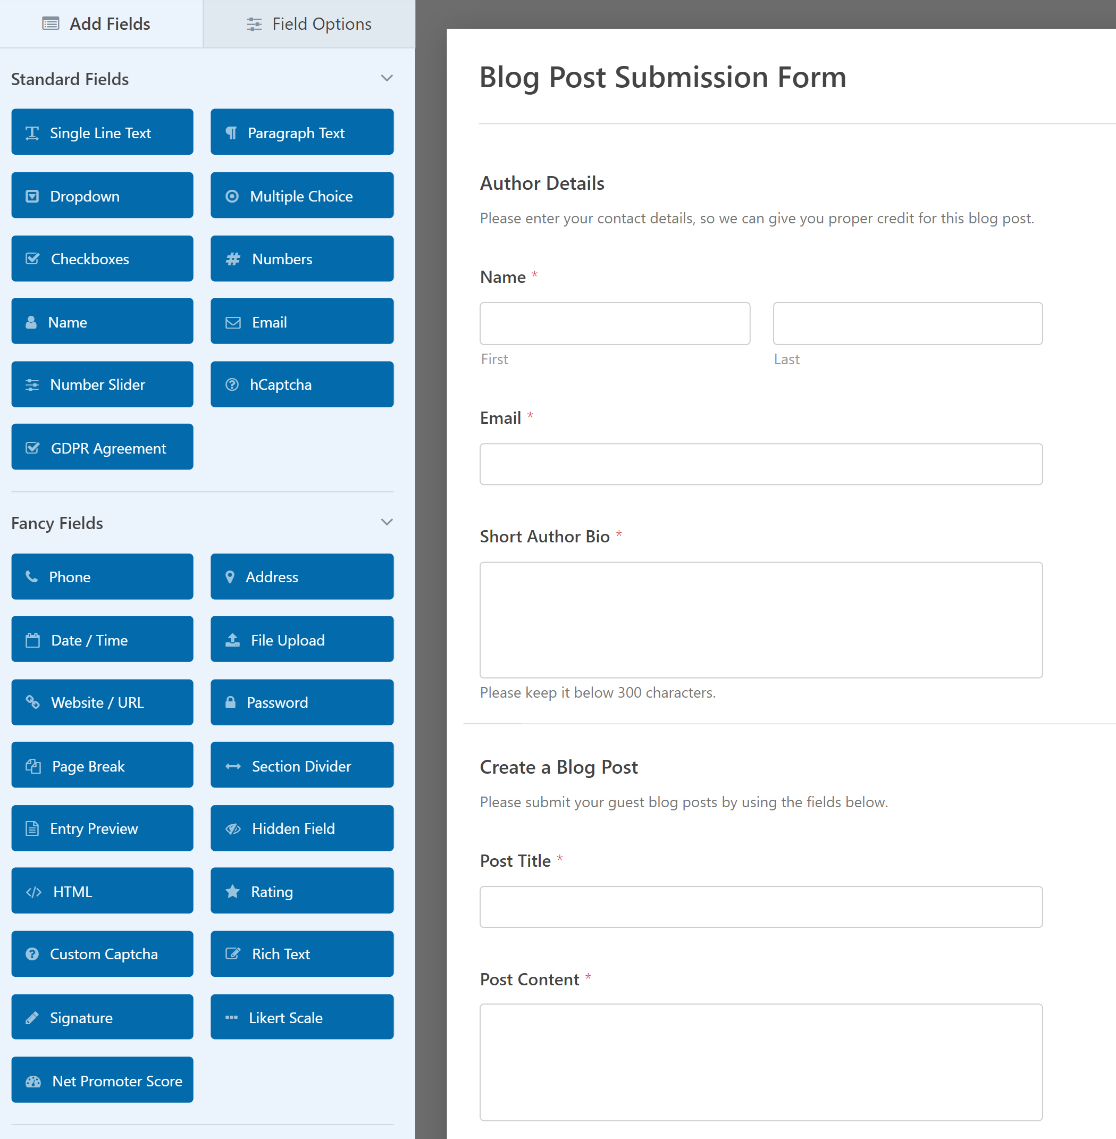 The Blog Post Submission Form template